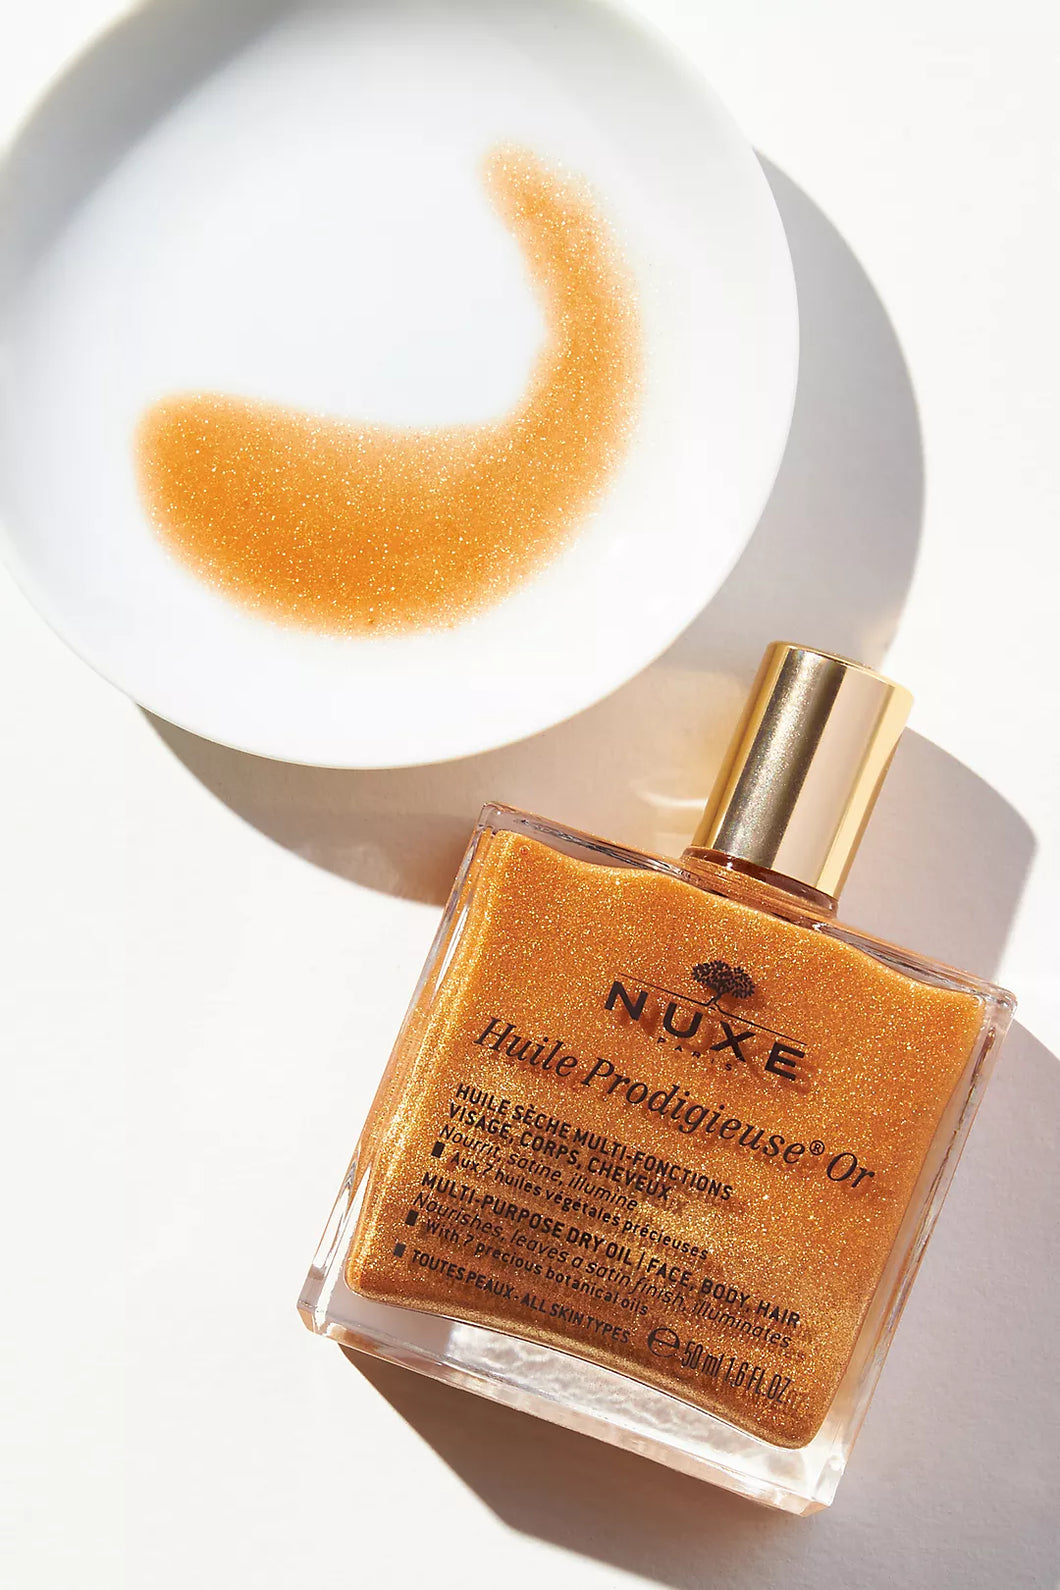 nuxe shimmering skin oil in travel size at westport ct boutique